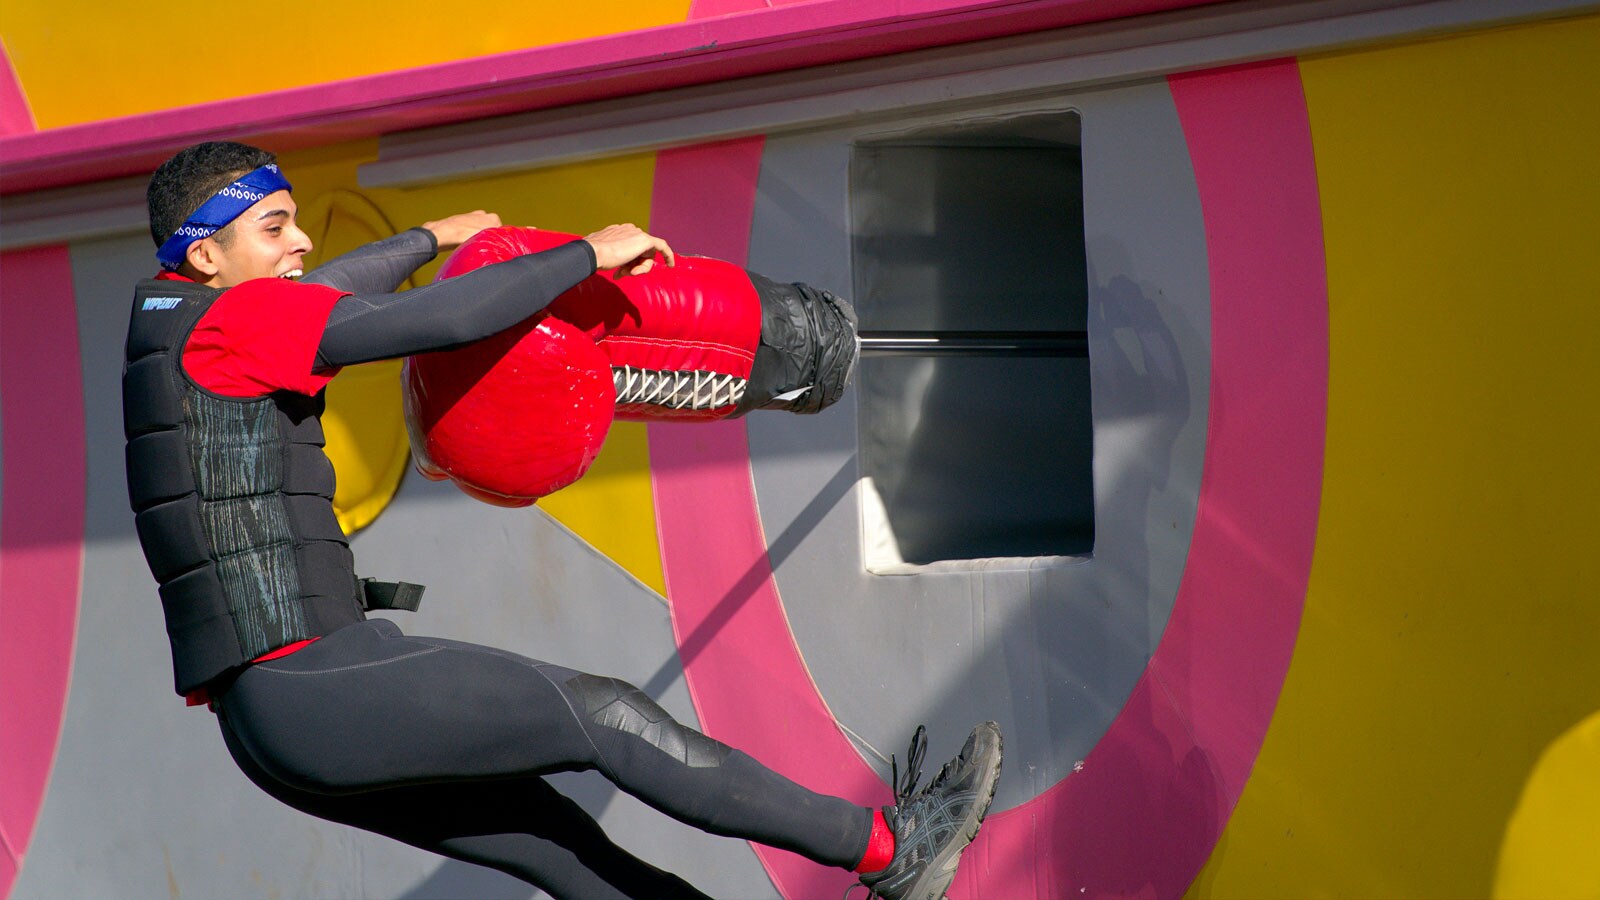 Wipeout' Returns 'Bigger, Bolder, Edgier' – and Funnier, Thanks to